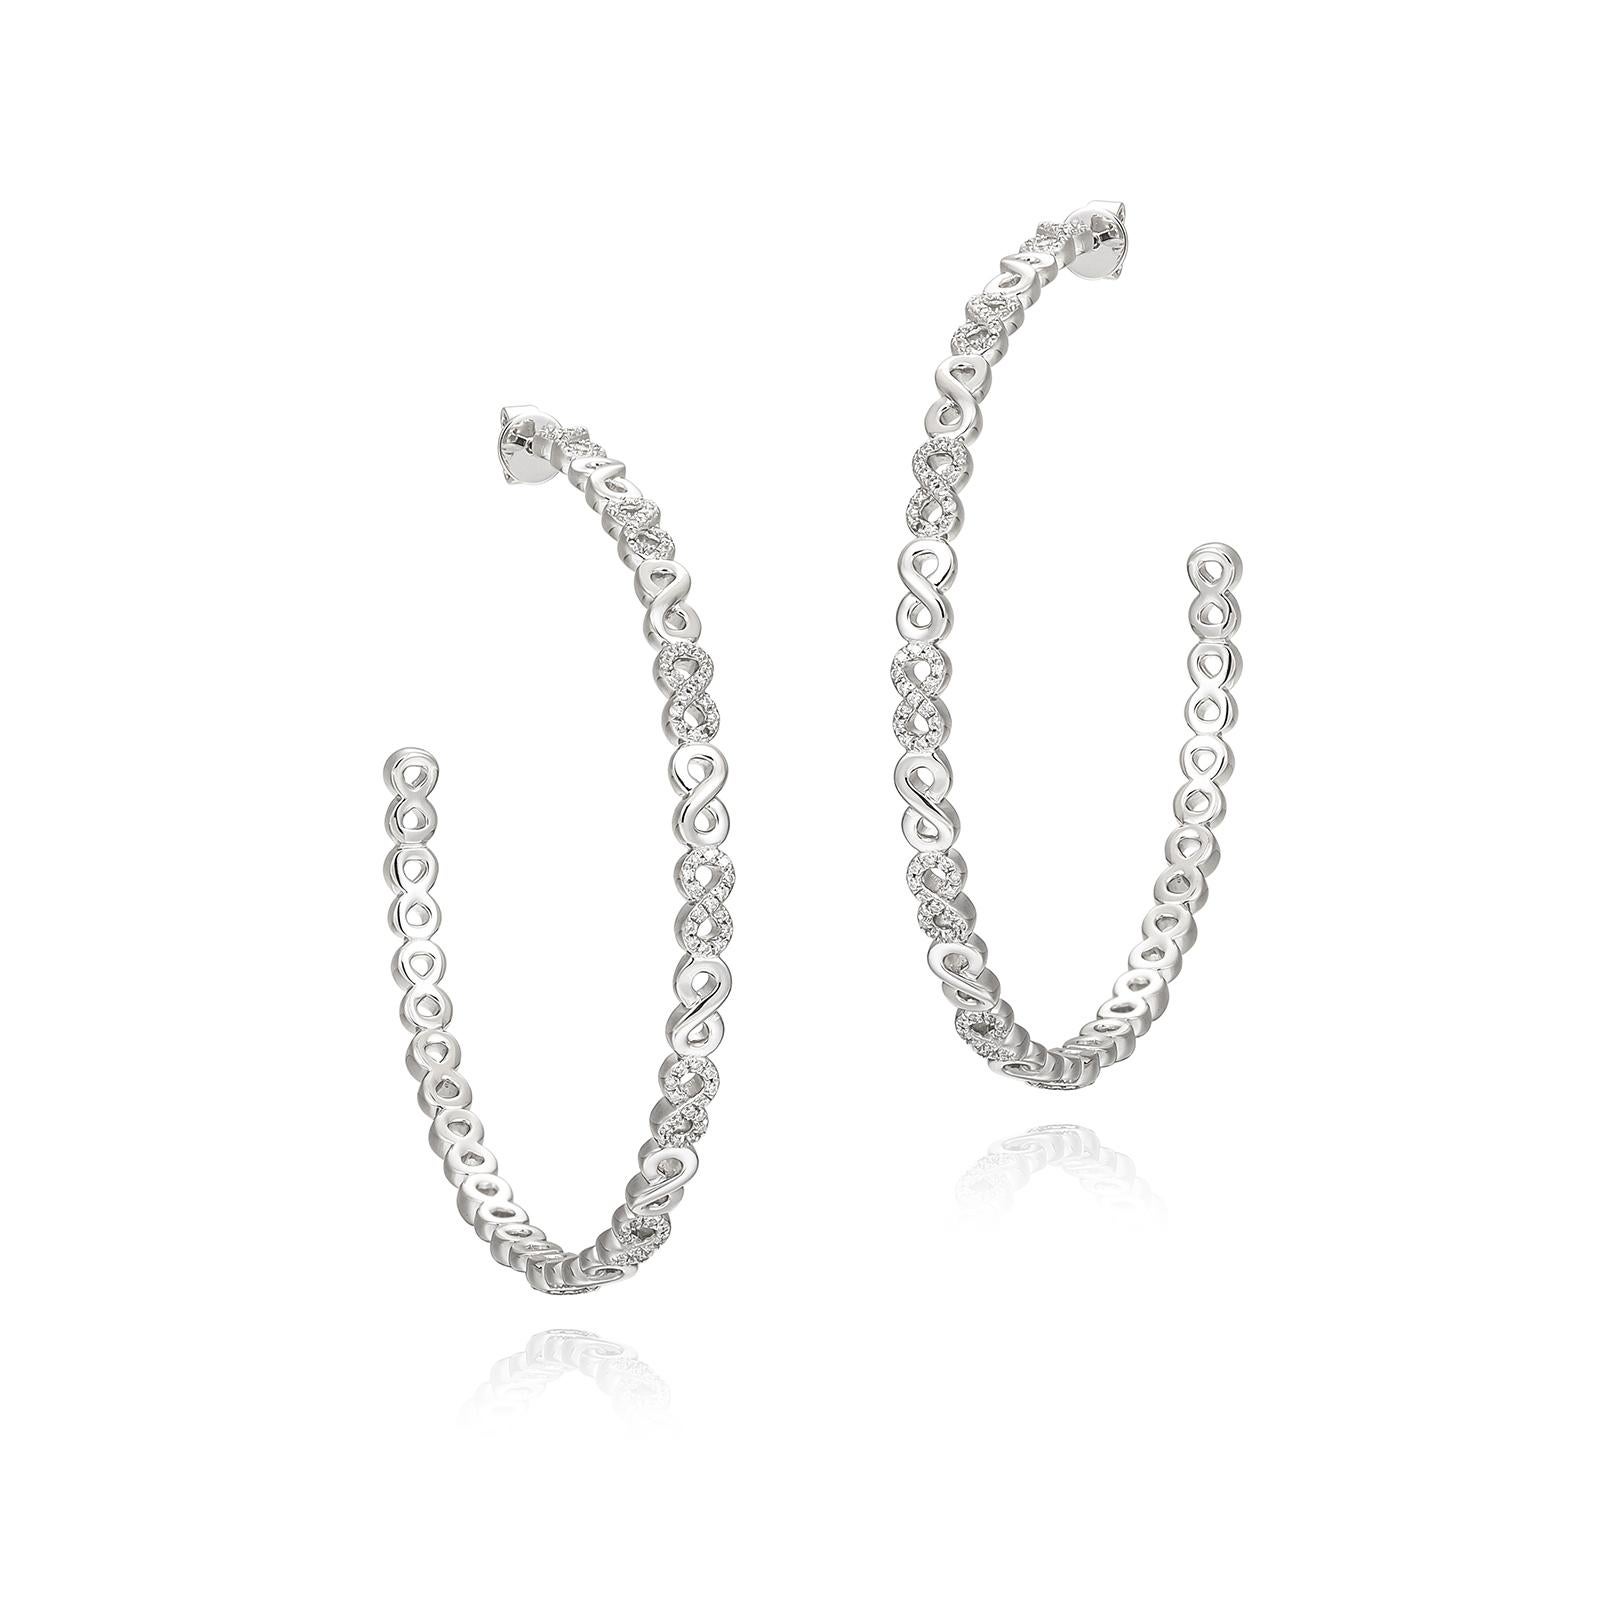 When it comes to self-expression, the style possibilities are endless. These large infinity pave hoops are a stunning statement of your infinite strength and enduring style; transitioning easily from day to night. .925 sterling silver base. Also